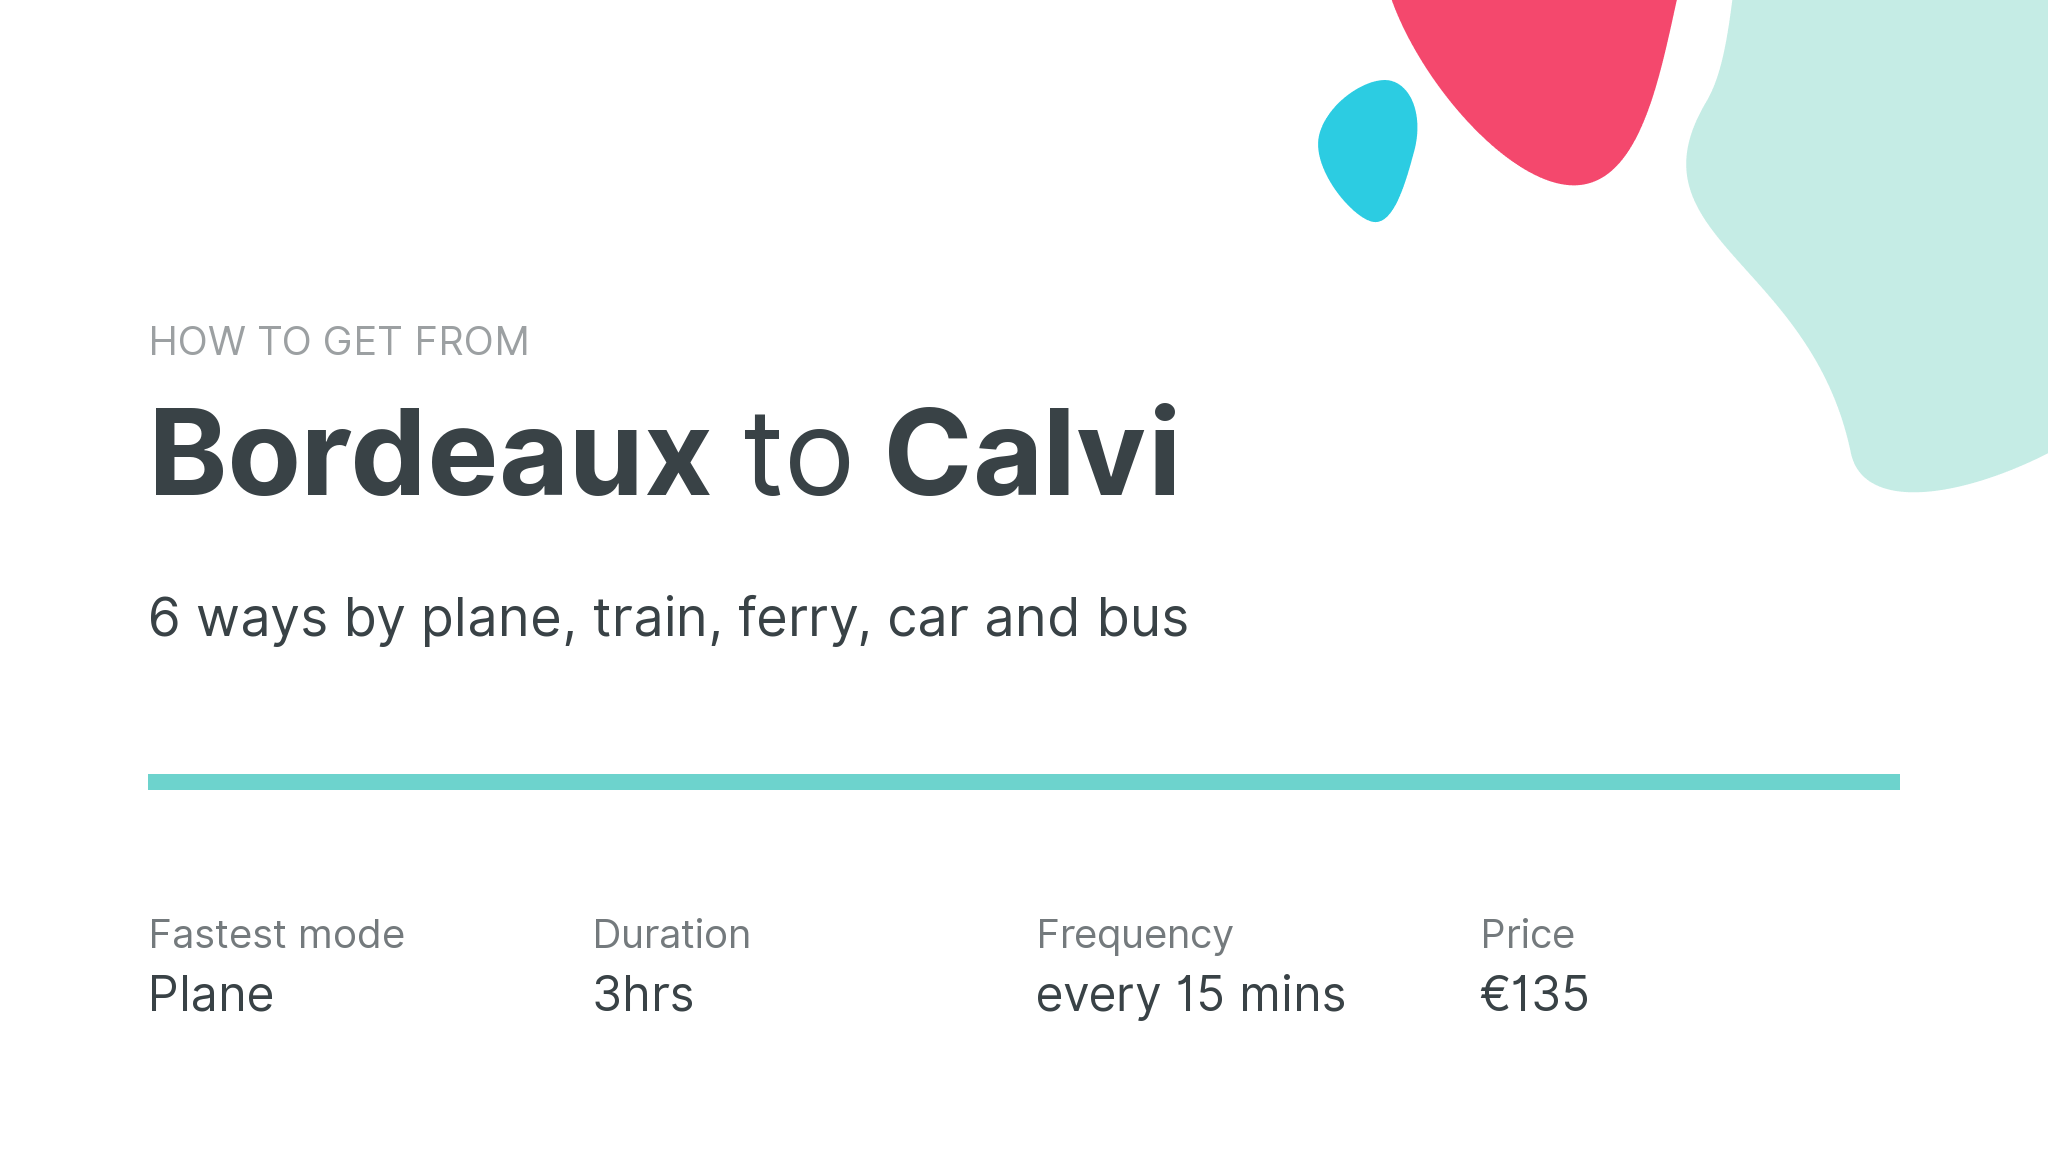 How do I get from Bordeaux to Calvi